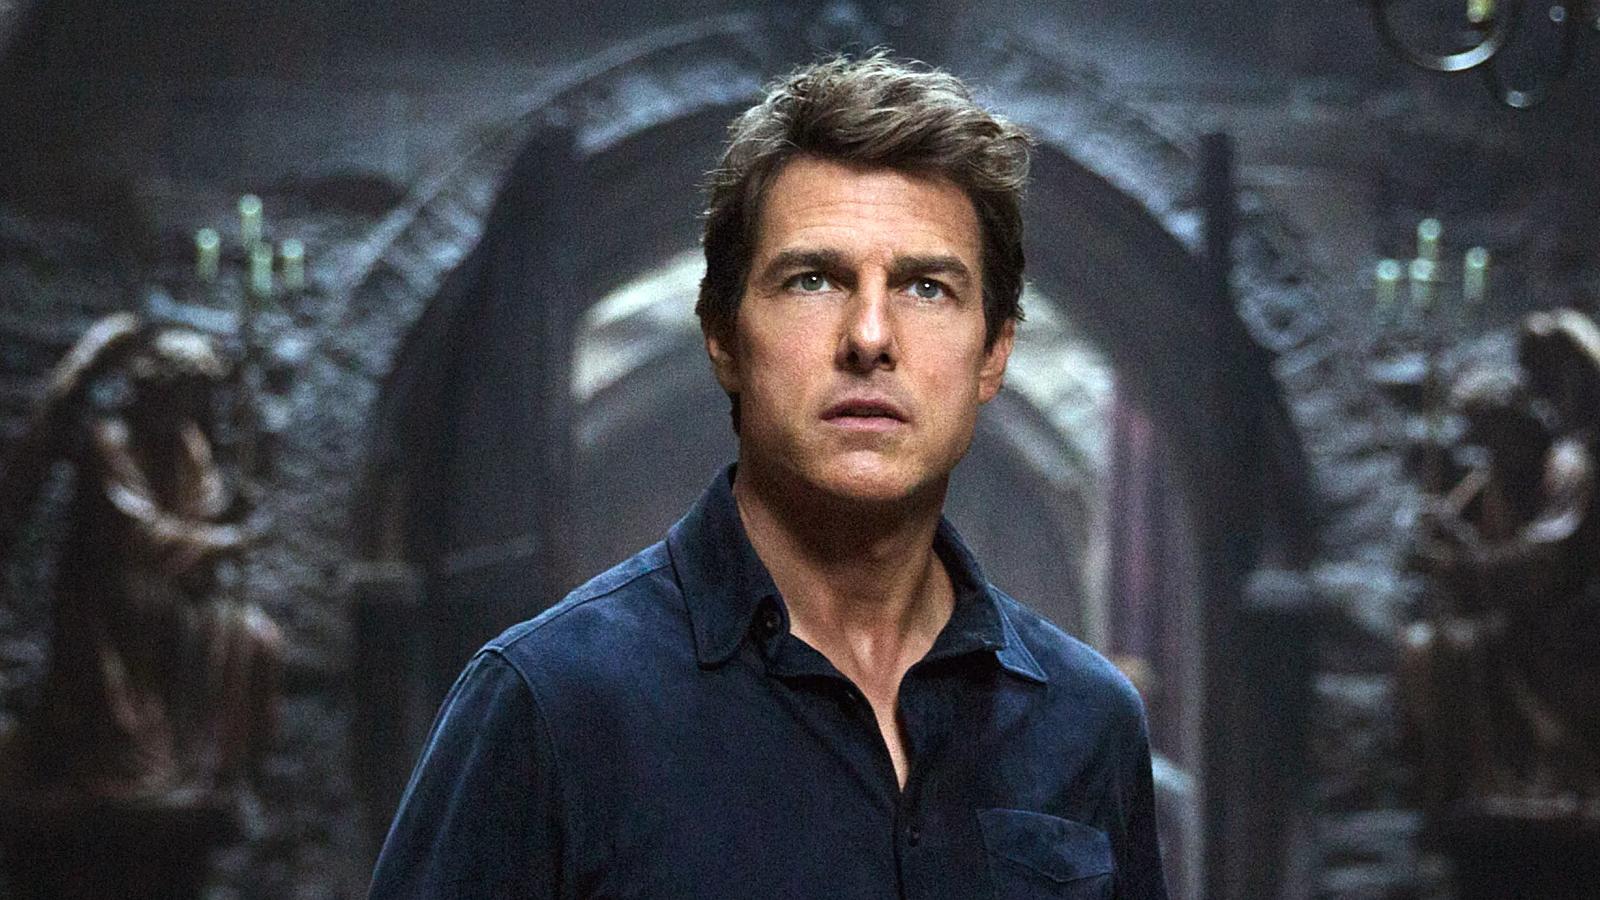 Tom Cruise as Nick Morton in 2017's The Mummy.